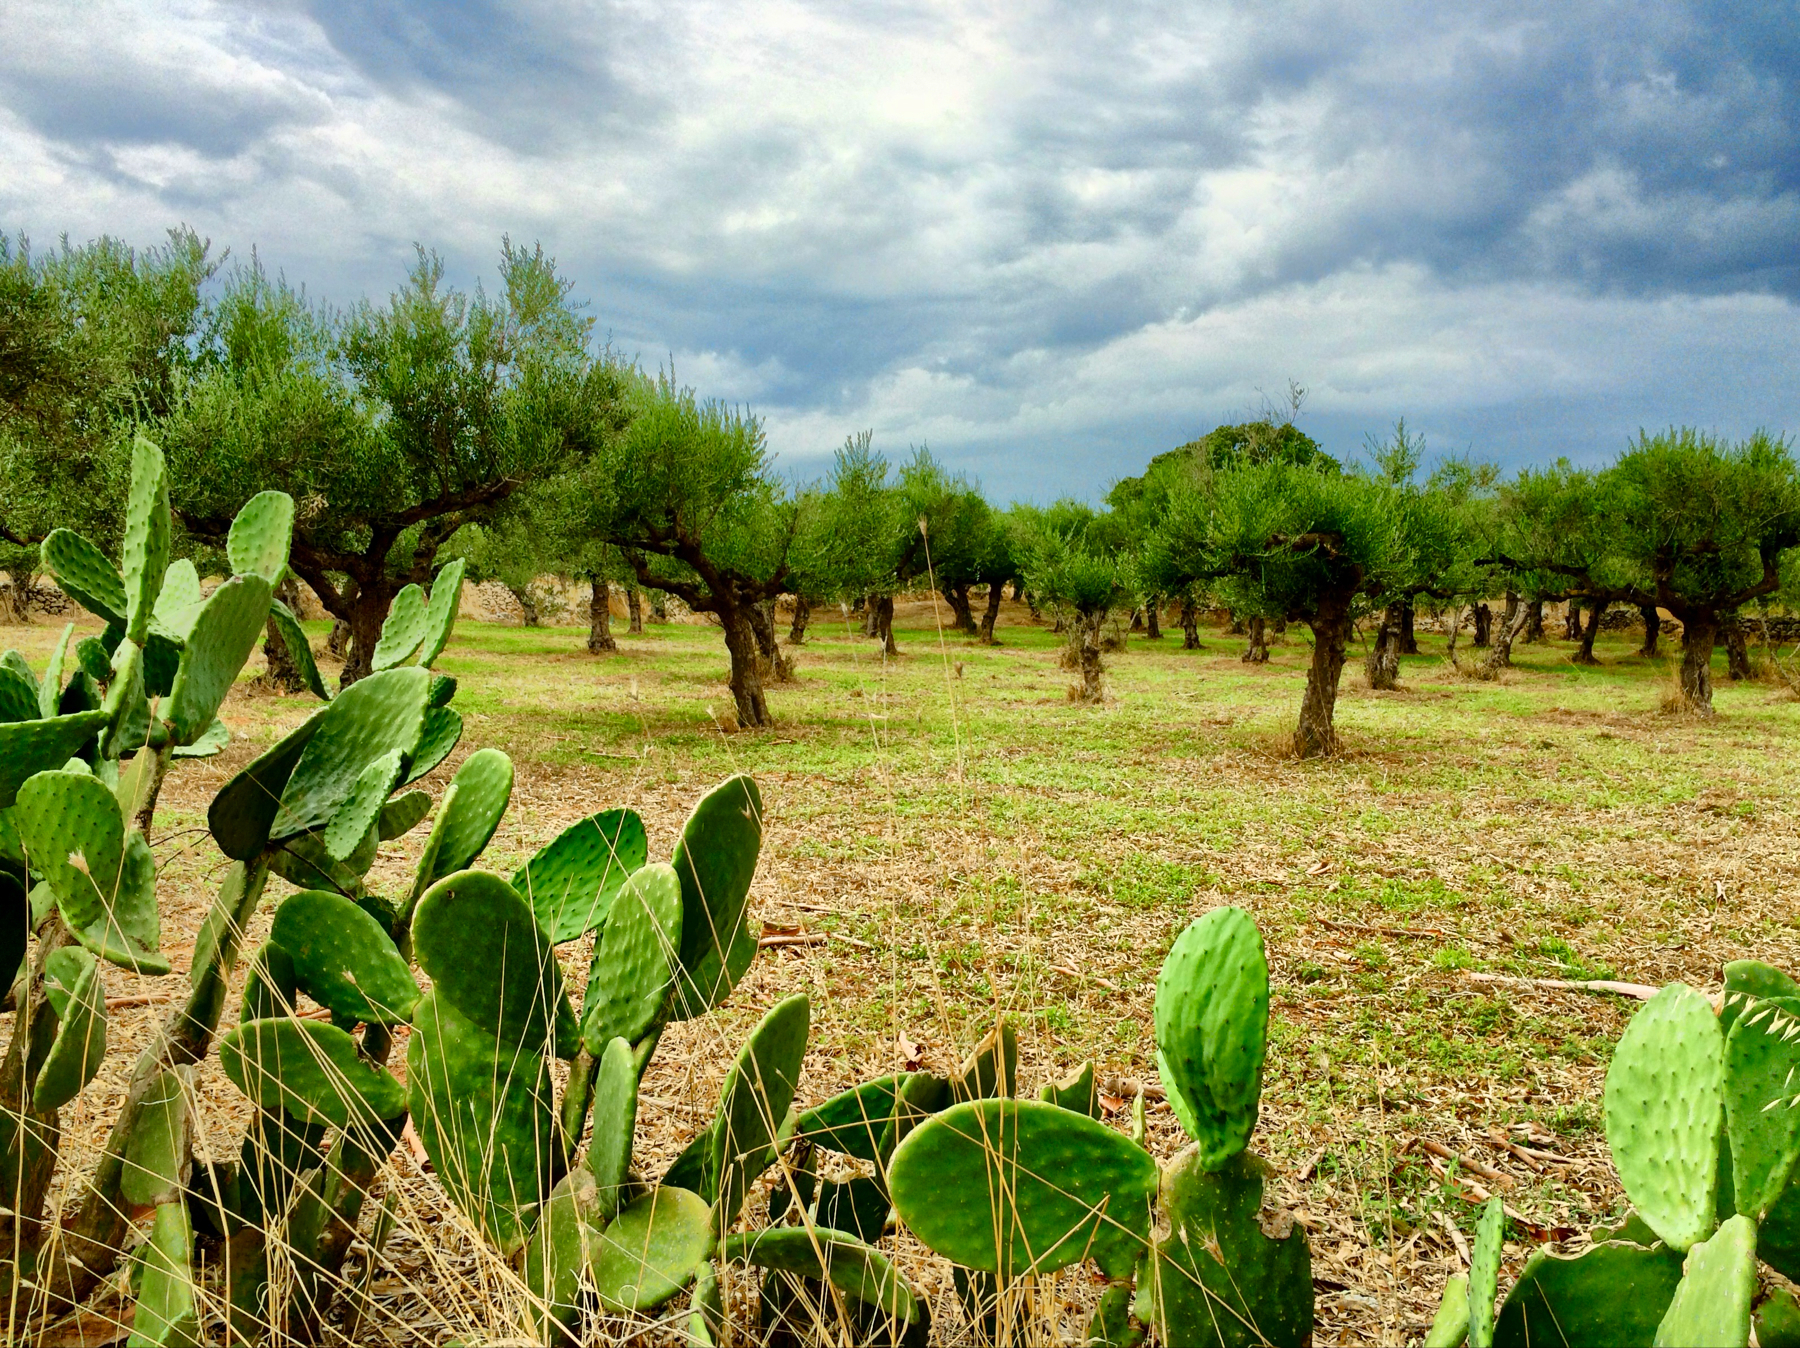 An olive grove with mature trees and prickly pear cacti in the foreground under a cloudy sky.